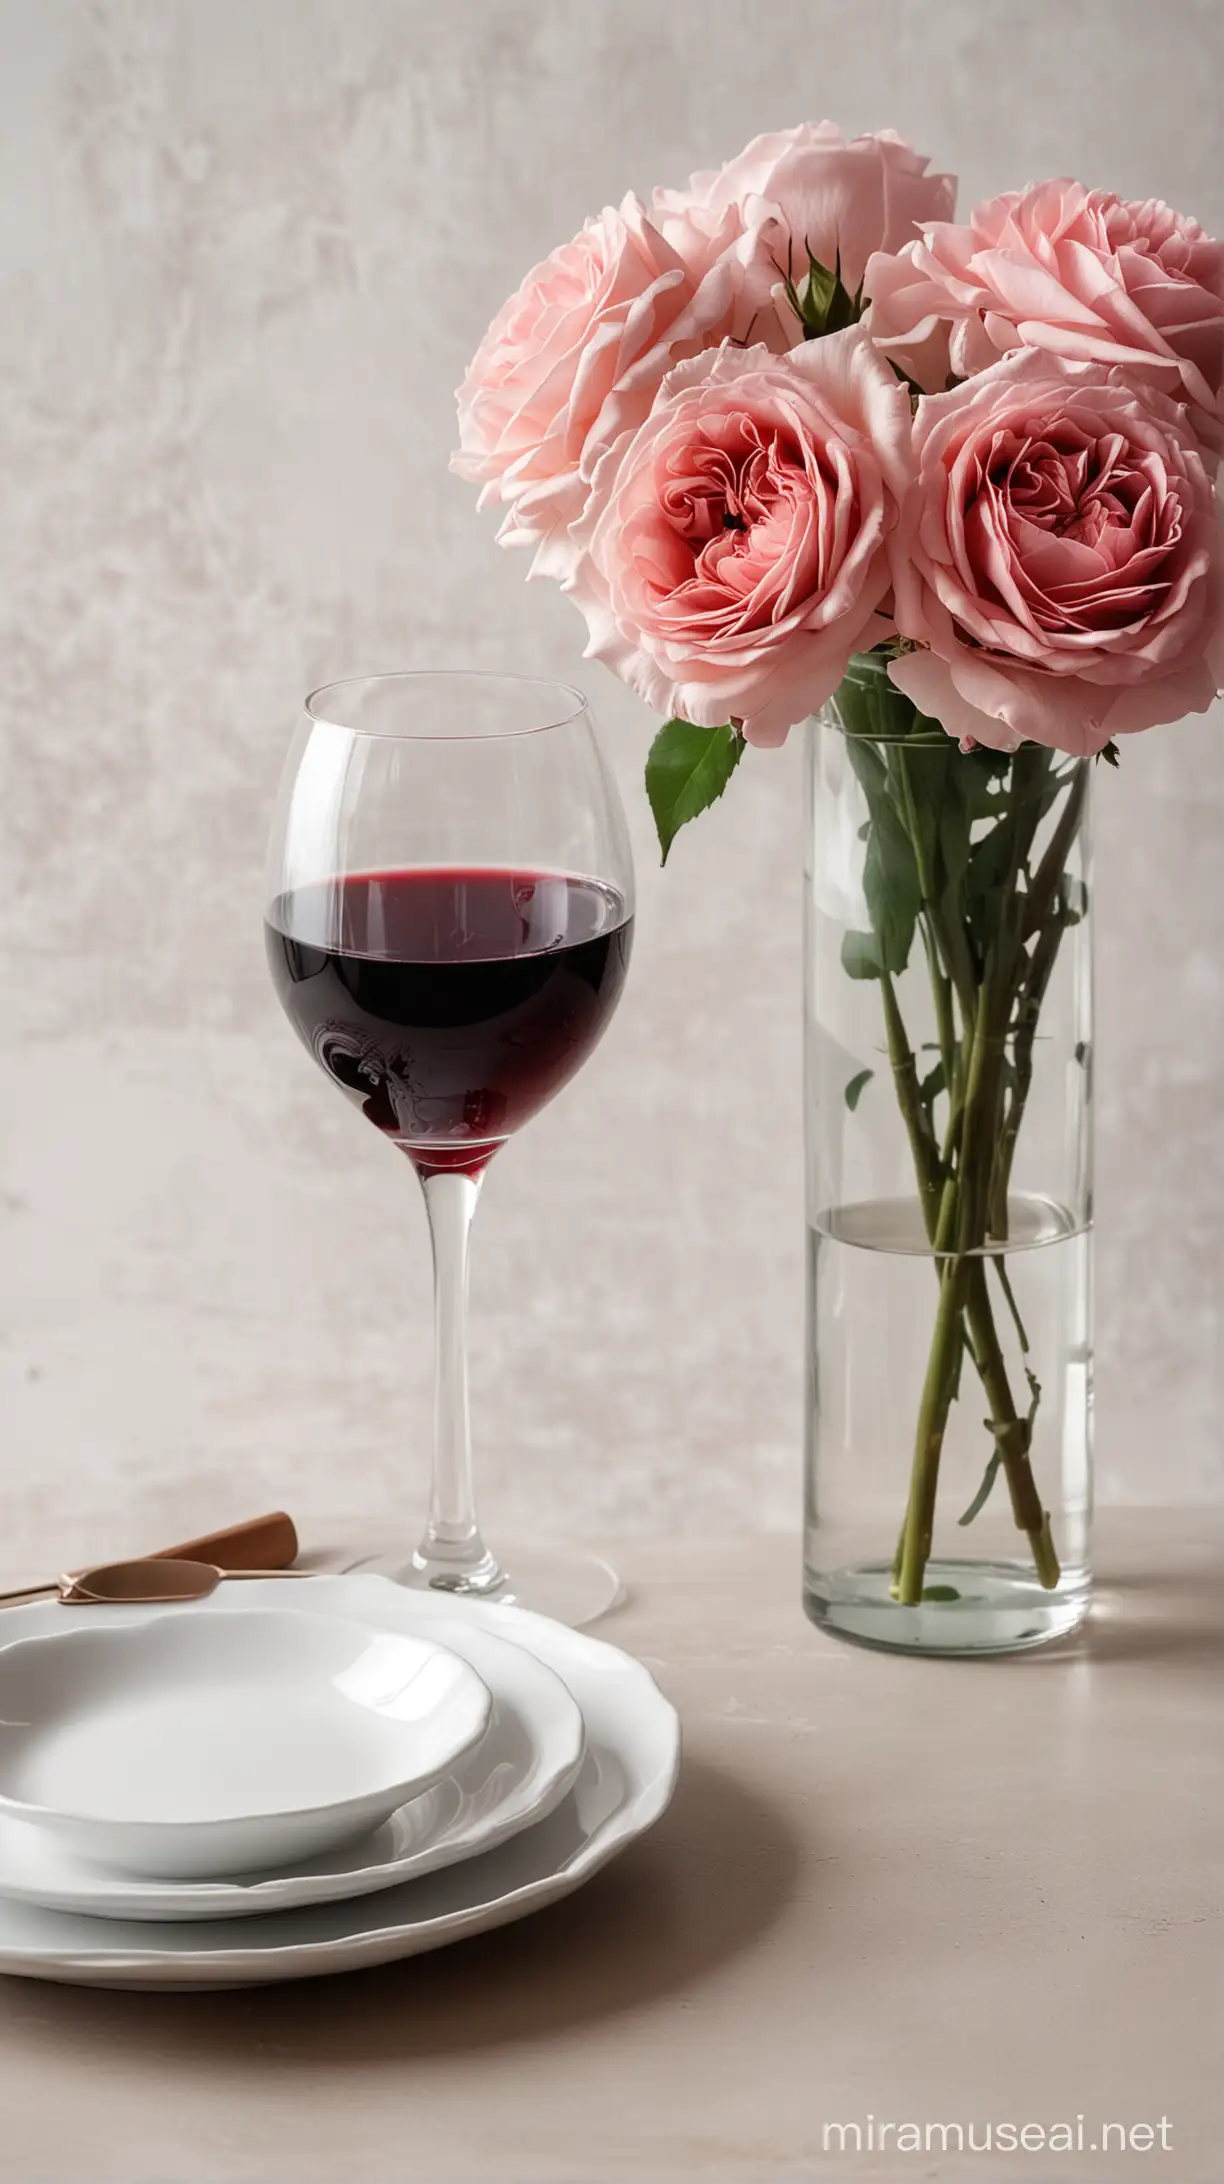 foreground on the table is a glass of red wine, next to it is an empty white plate on the table, background on the table are delicate roses in a vase, light background, minimalist style, close-up